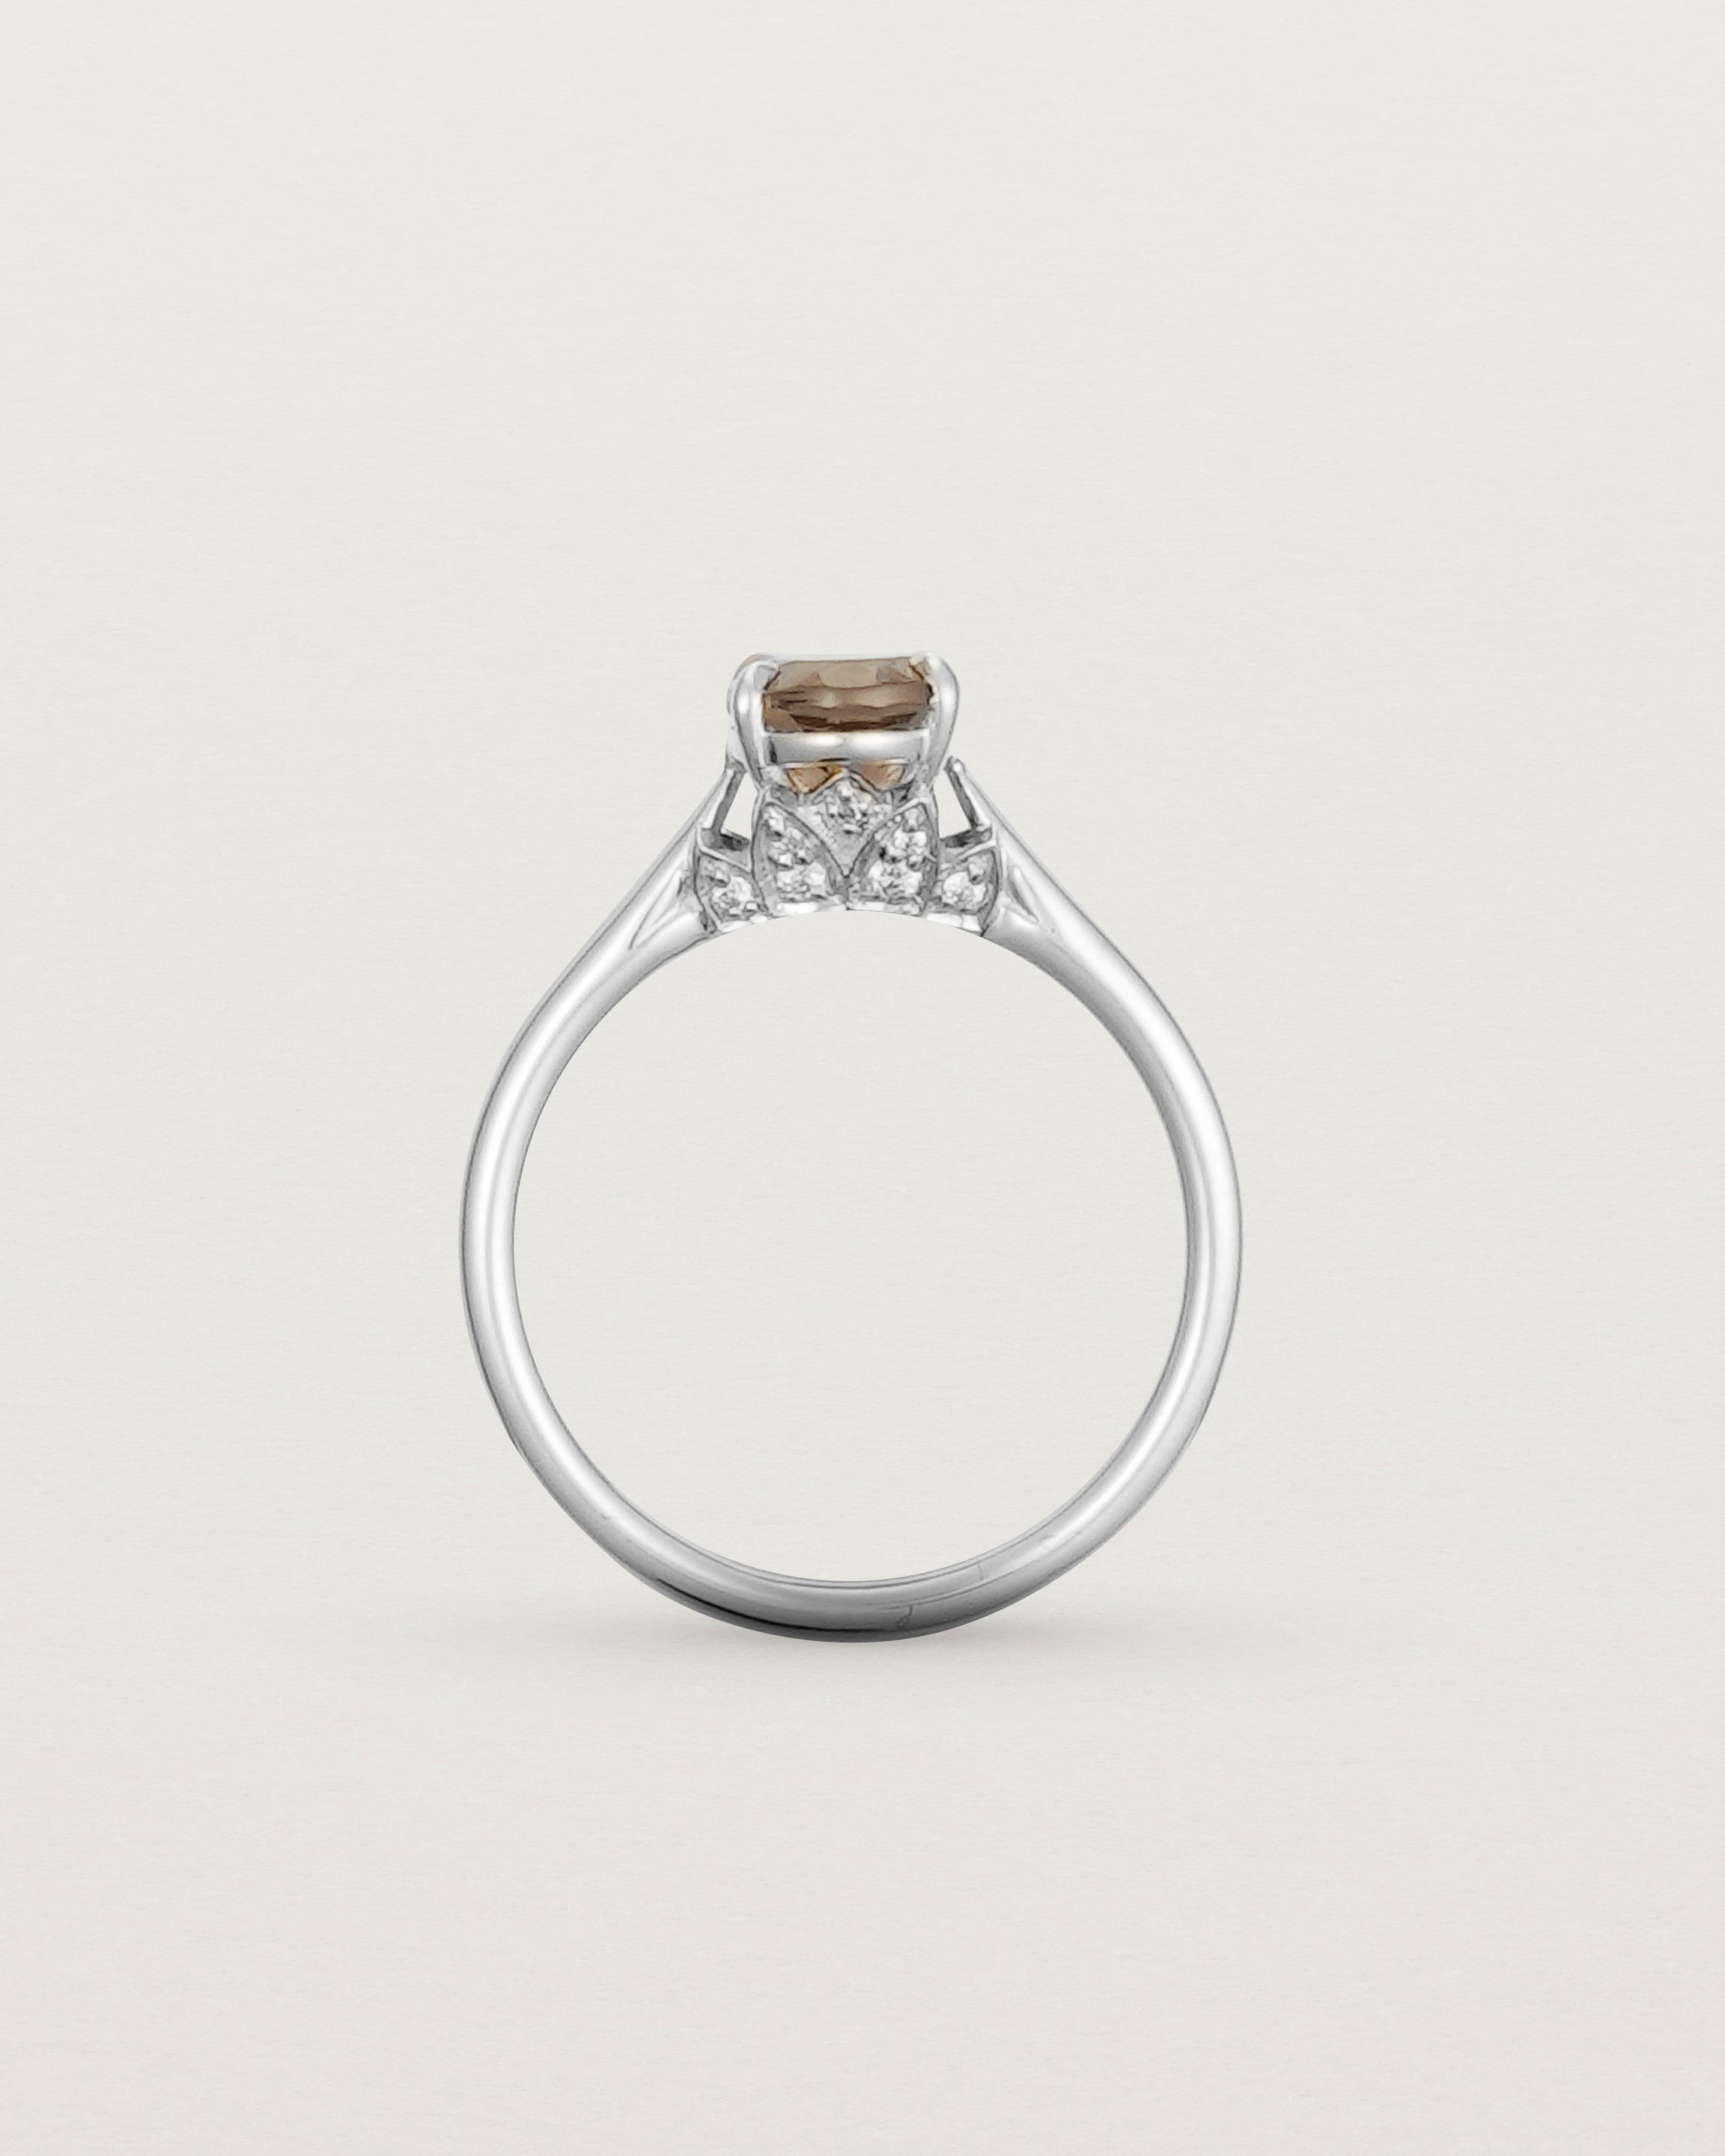 Standing view of the Kalina Oval Solitaire | Smokey Quartz | White Gold.